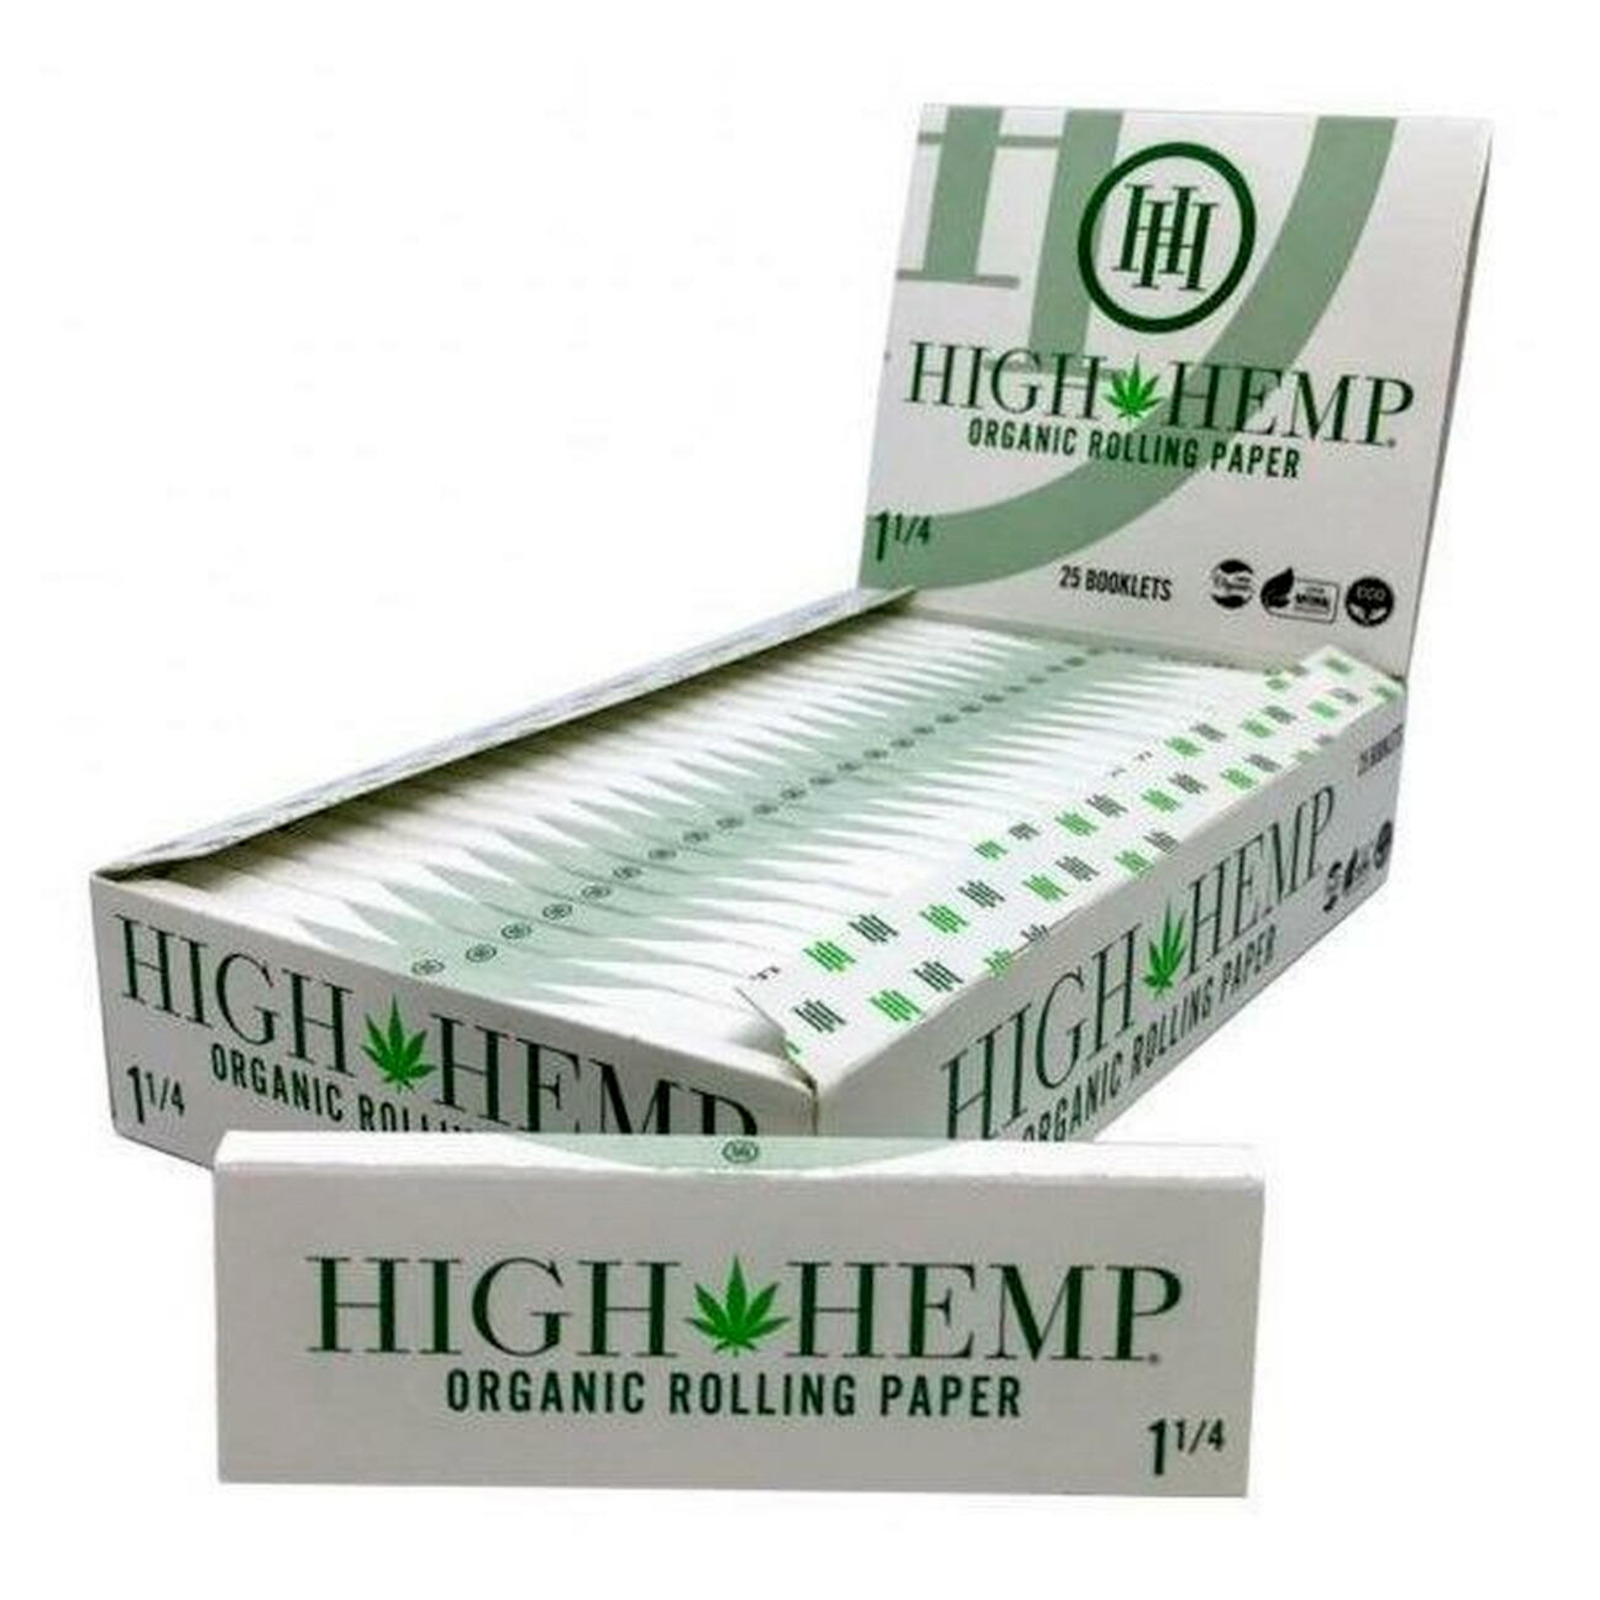 High Hemp Organic Rolling Papers - 25 Booklets (1-1/4 Size) with 